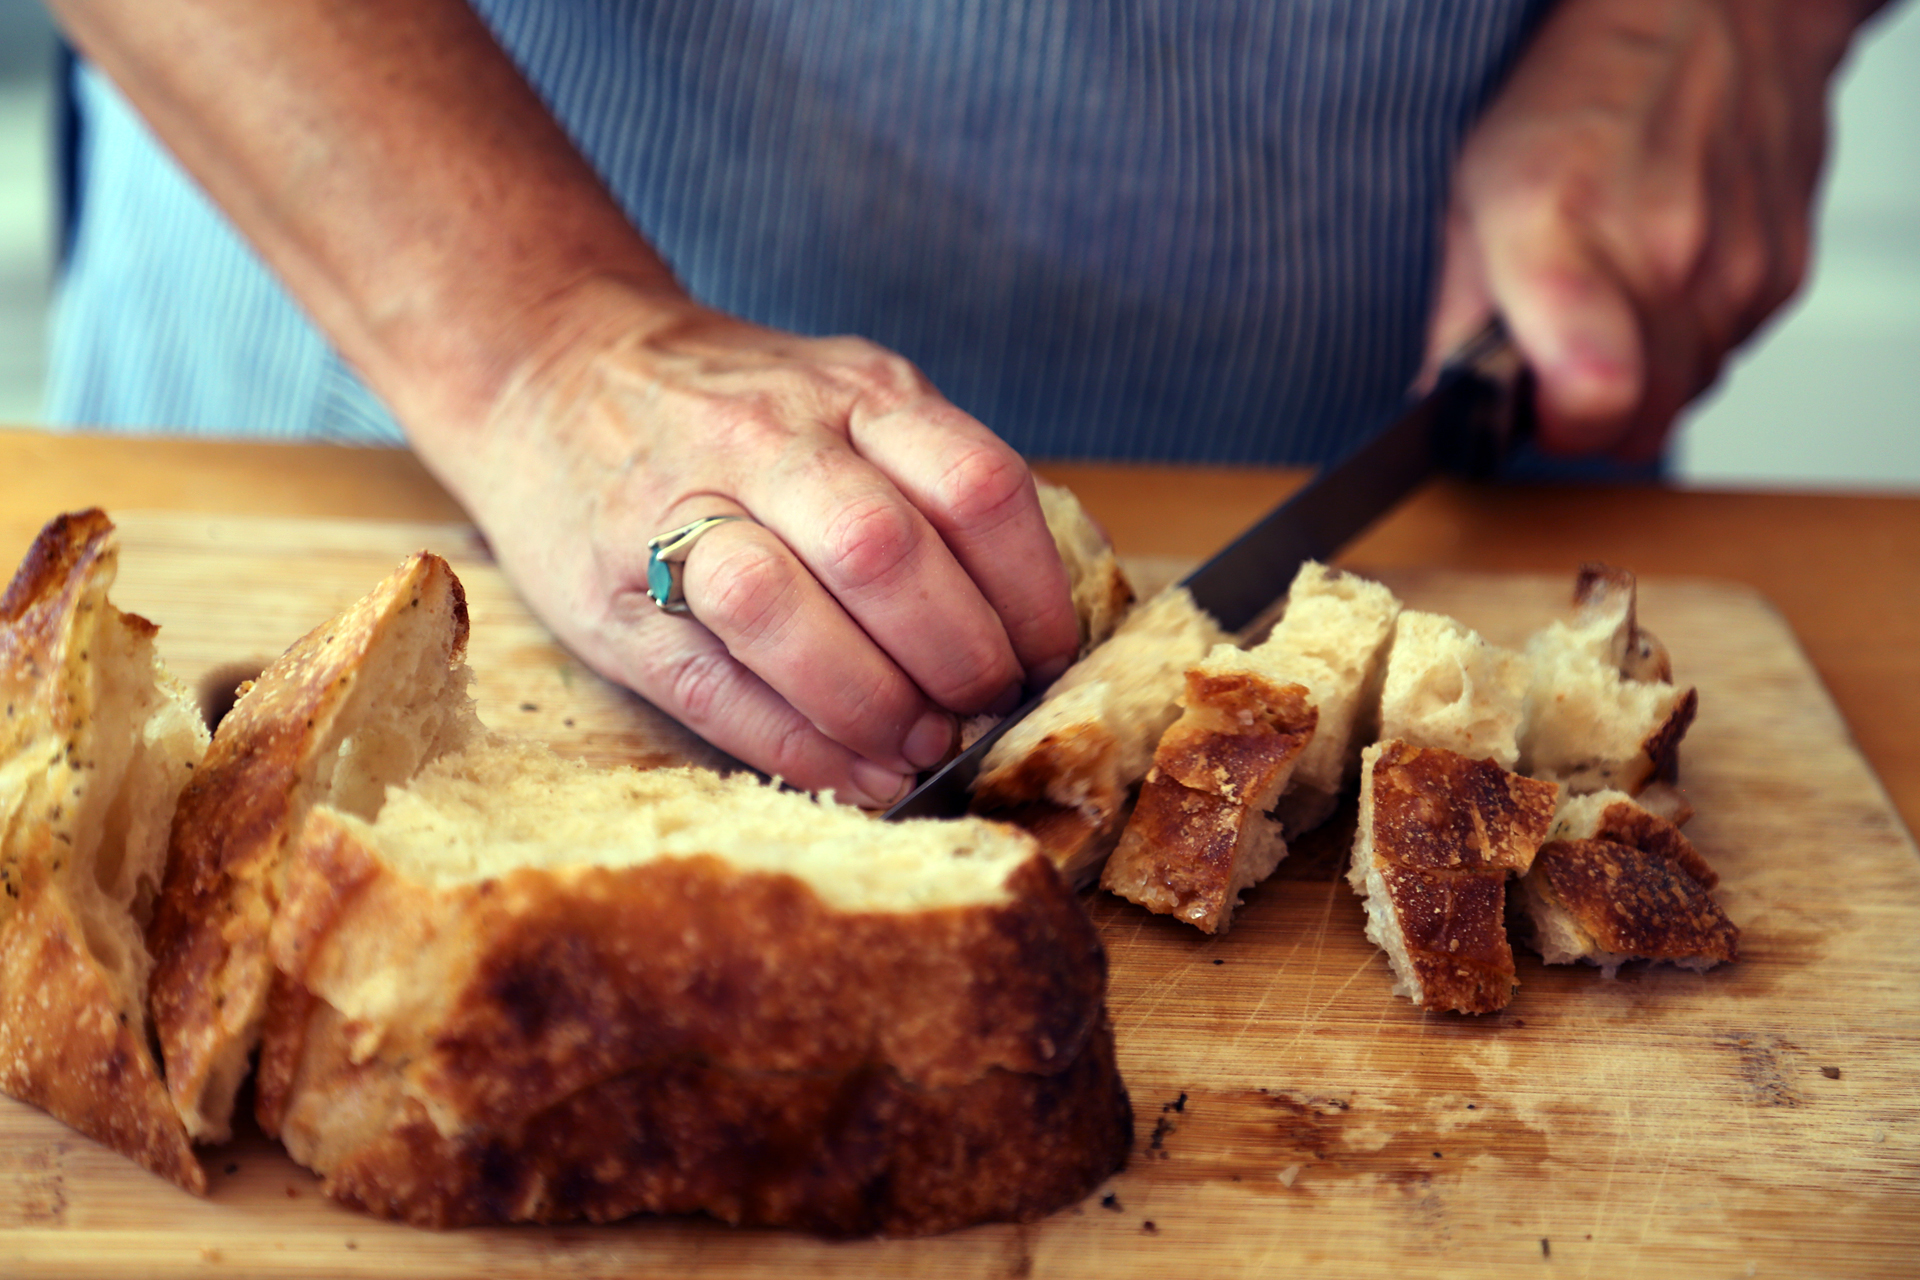 Cut the sourdough peasant bread into cubes and toast in the oven